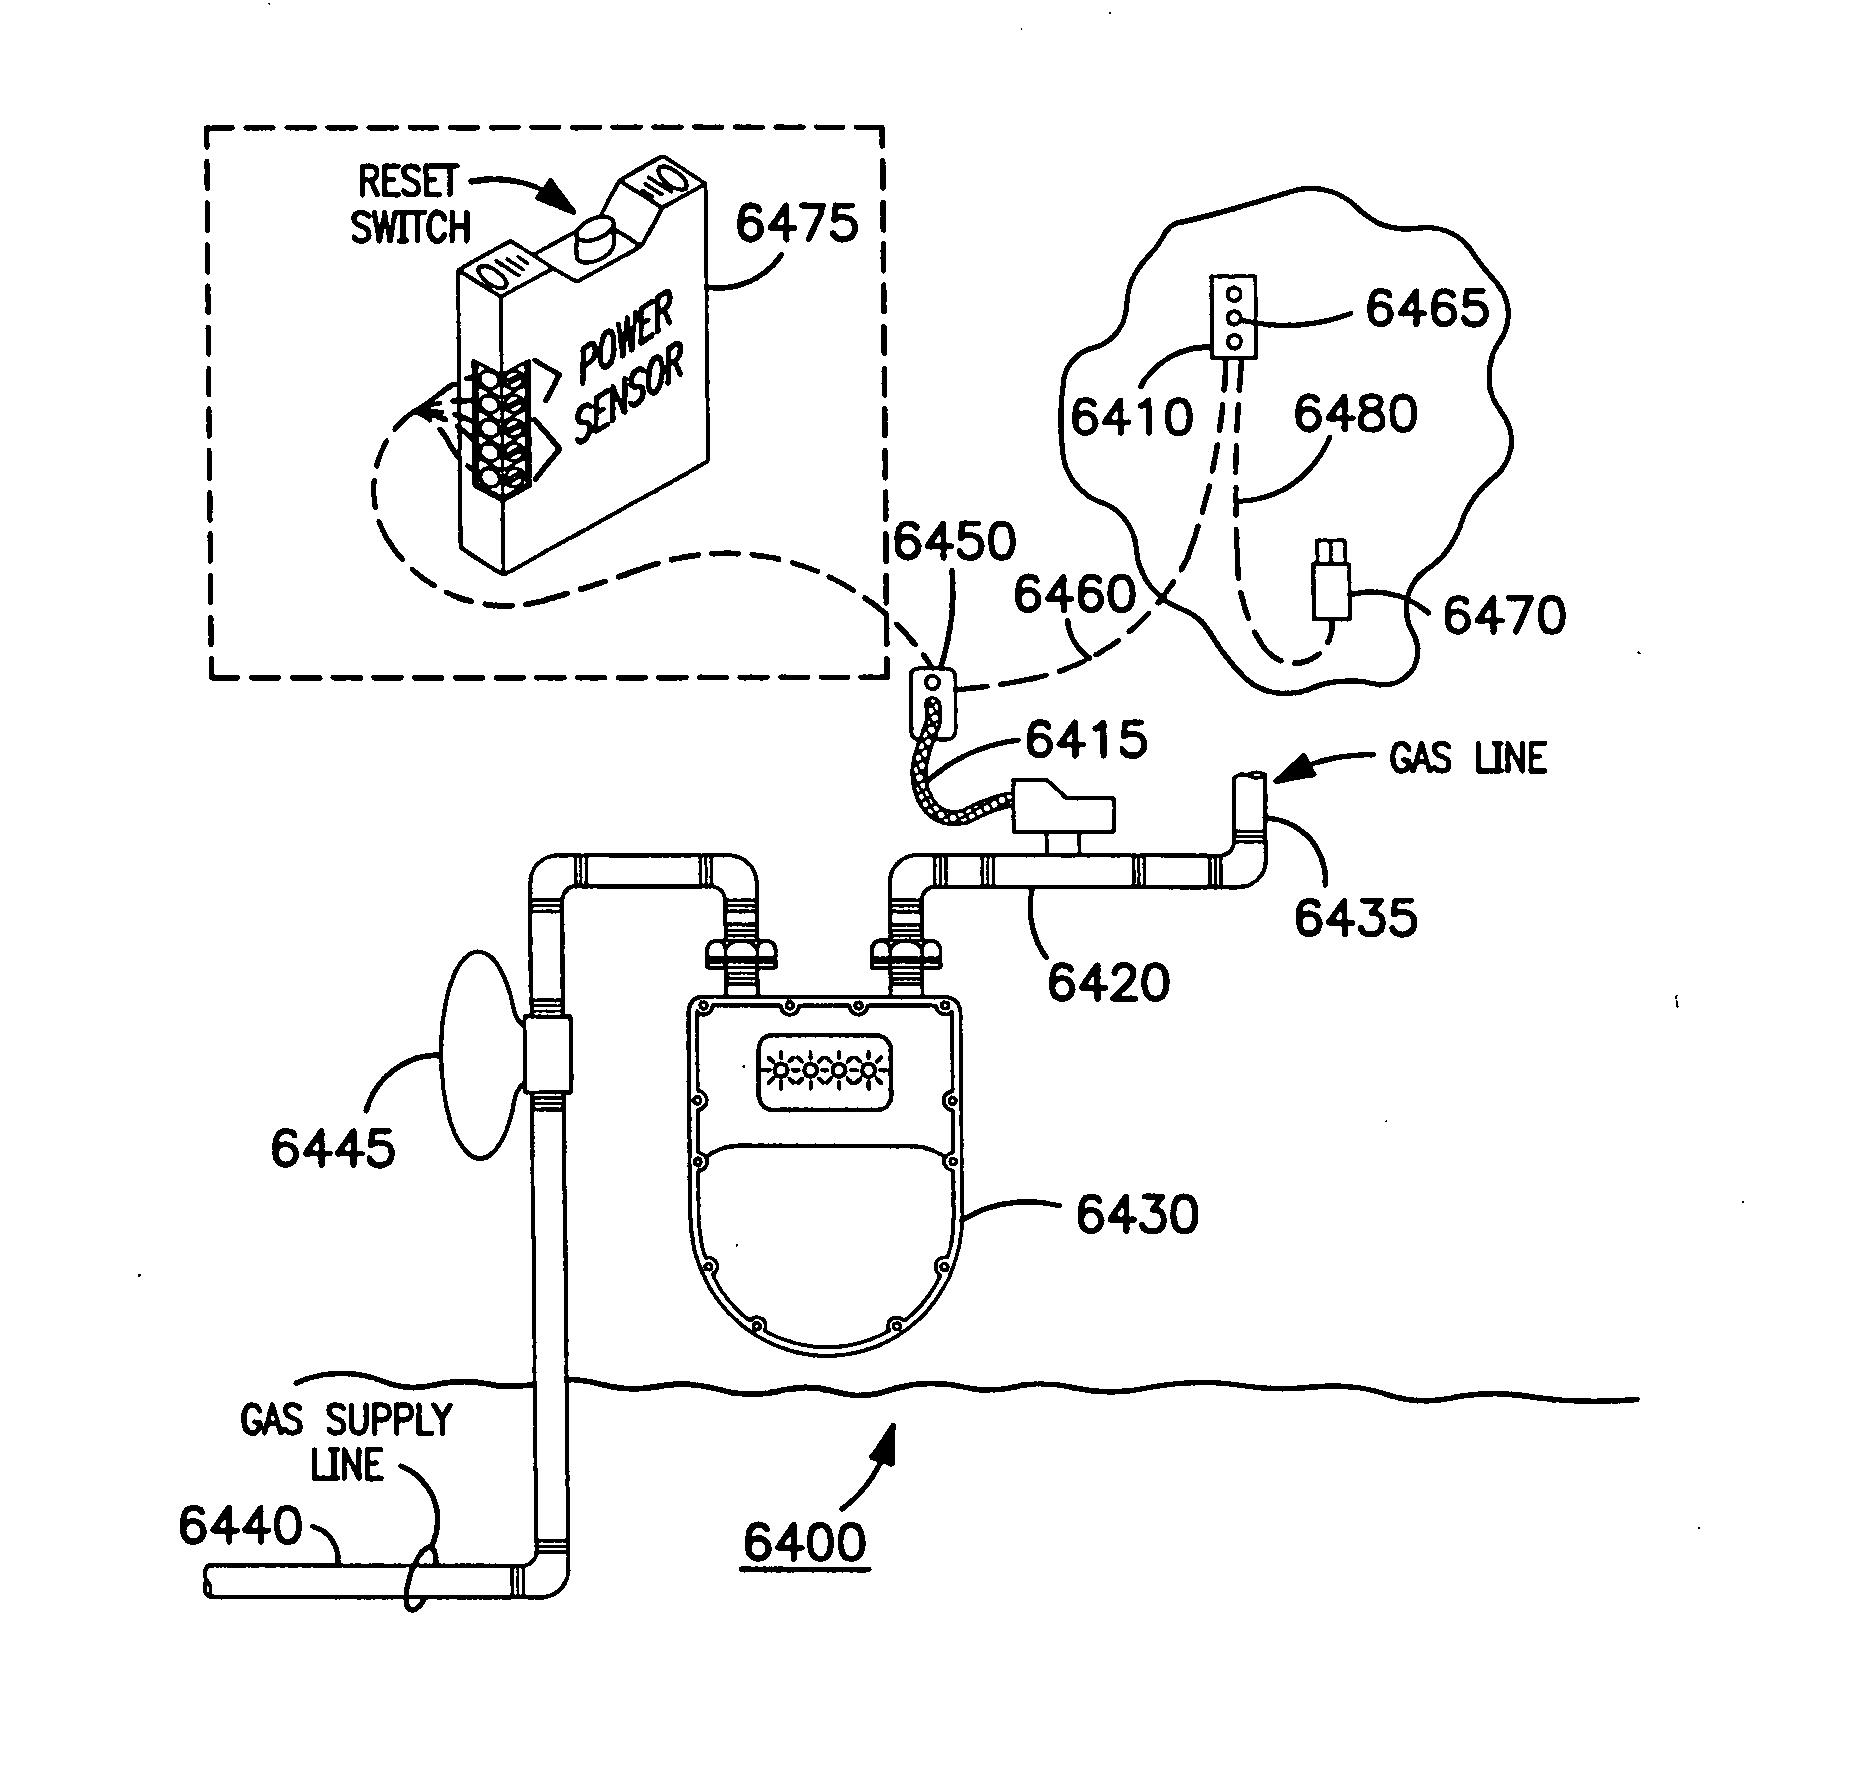 Systems and methods for monitoring and controlling fluid consumption